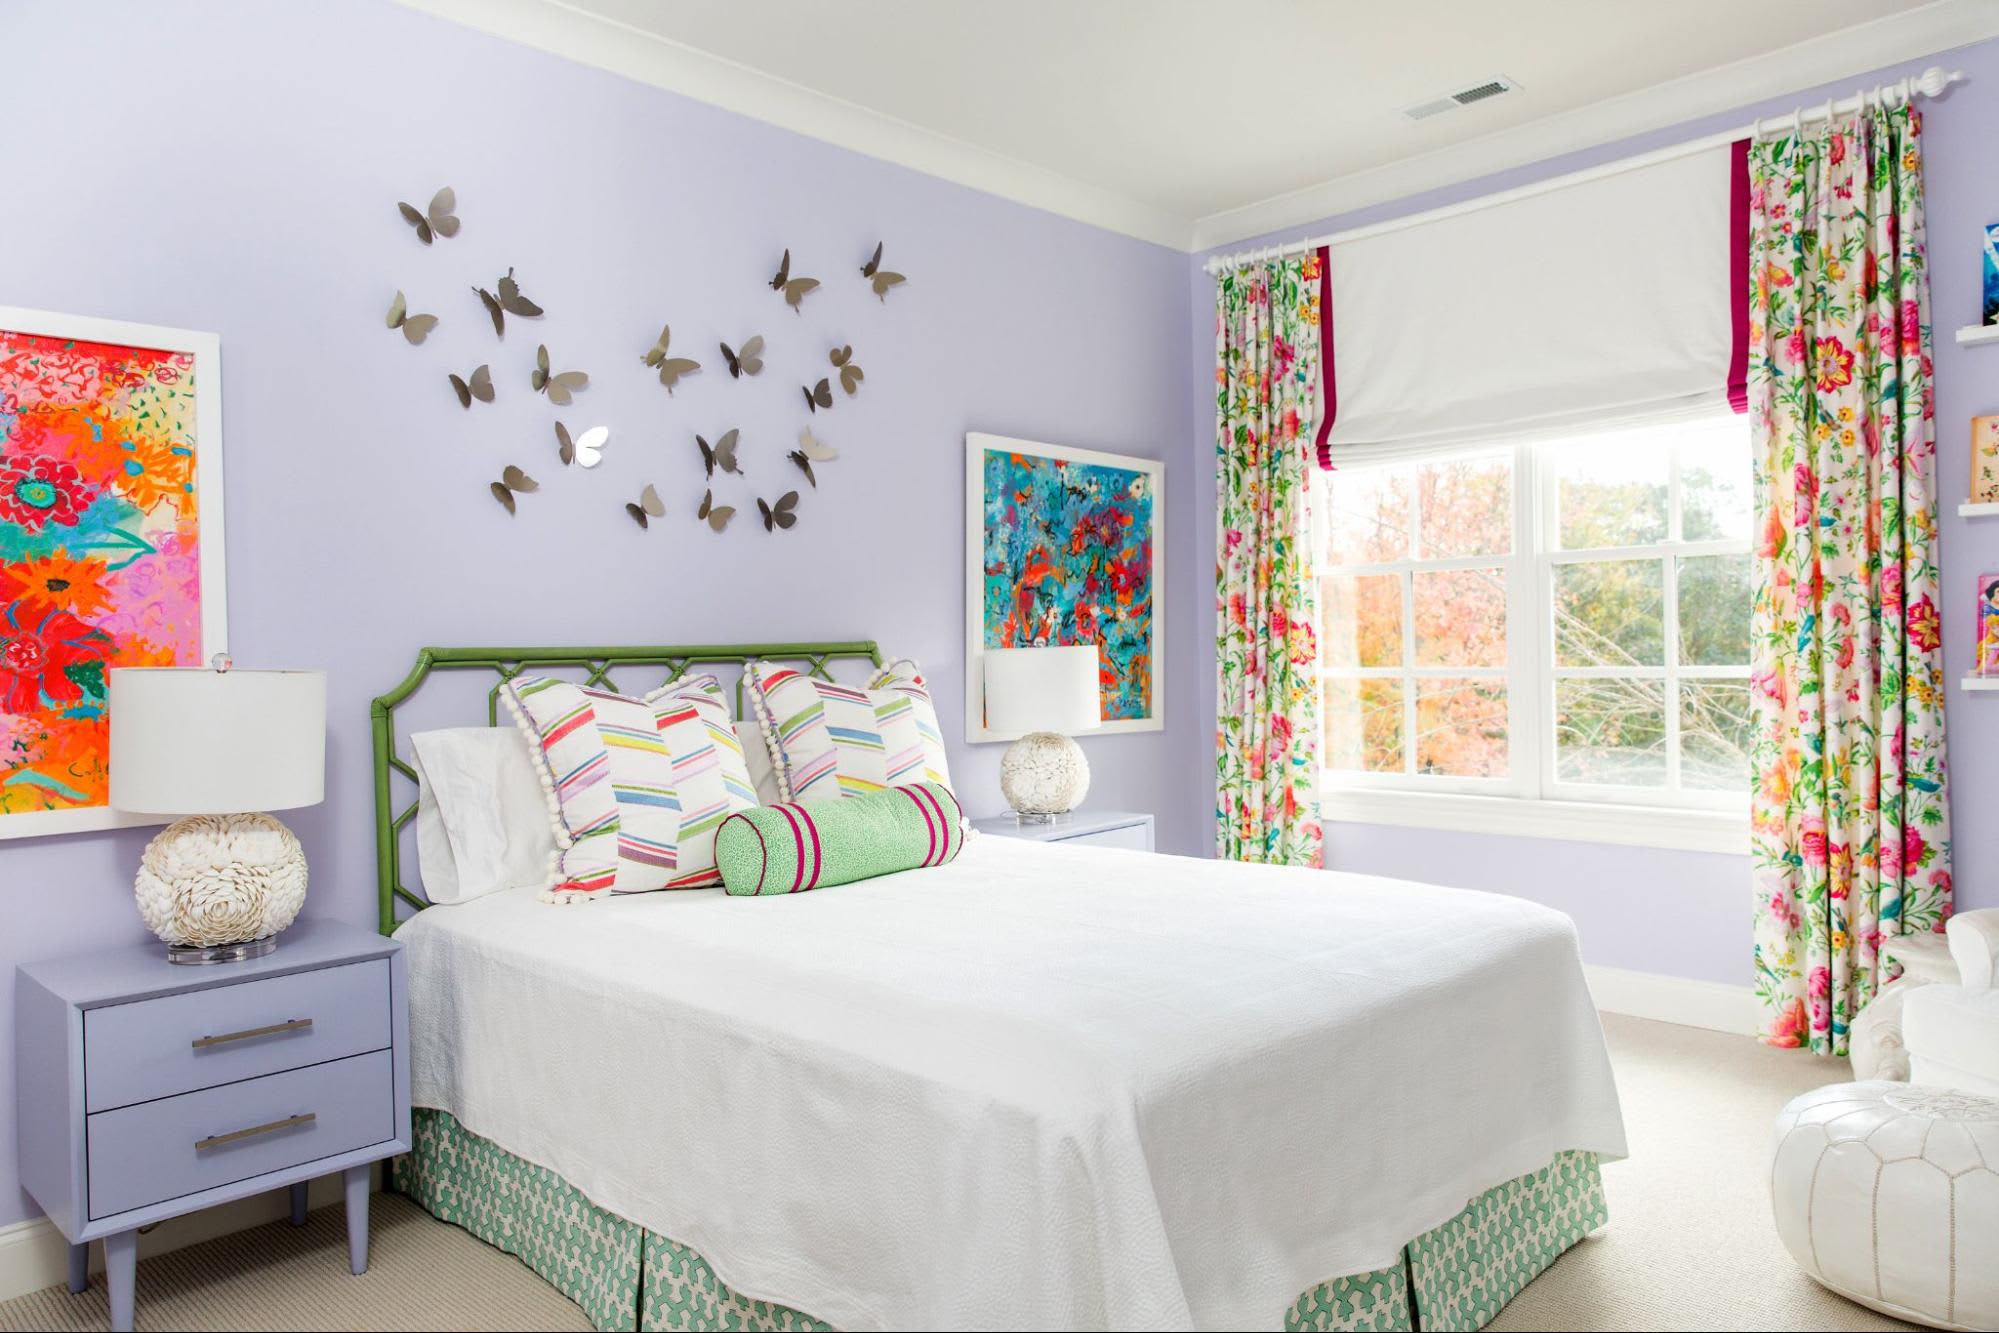 The Best Room Colors For Kids, Based on Science - Moshi